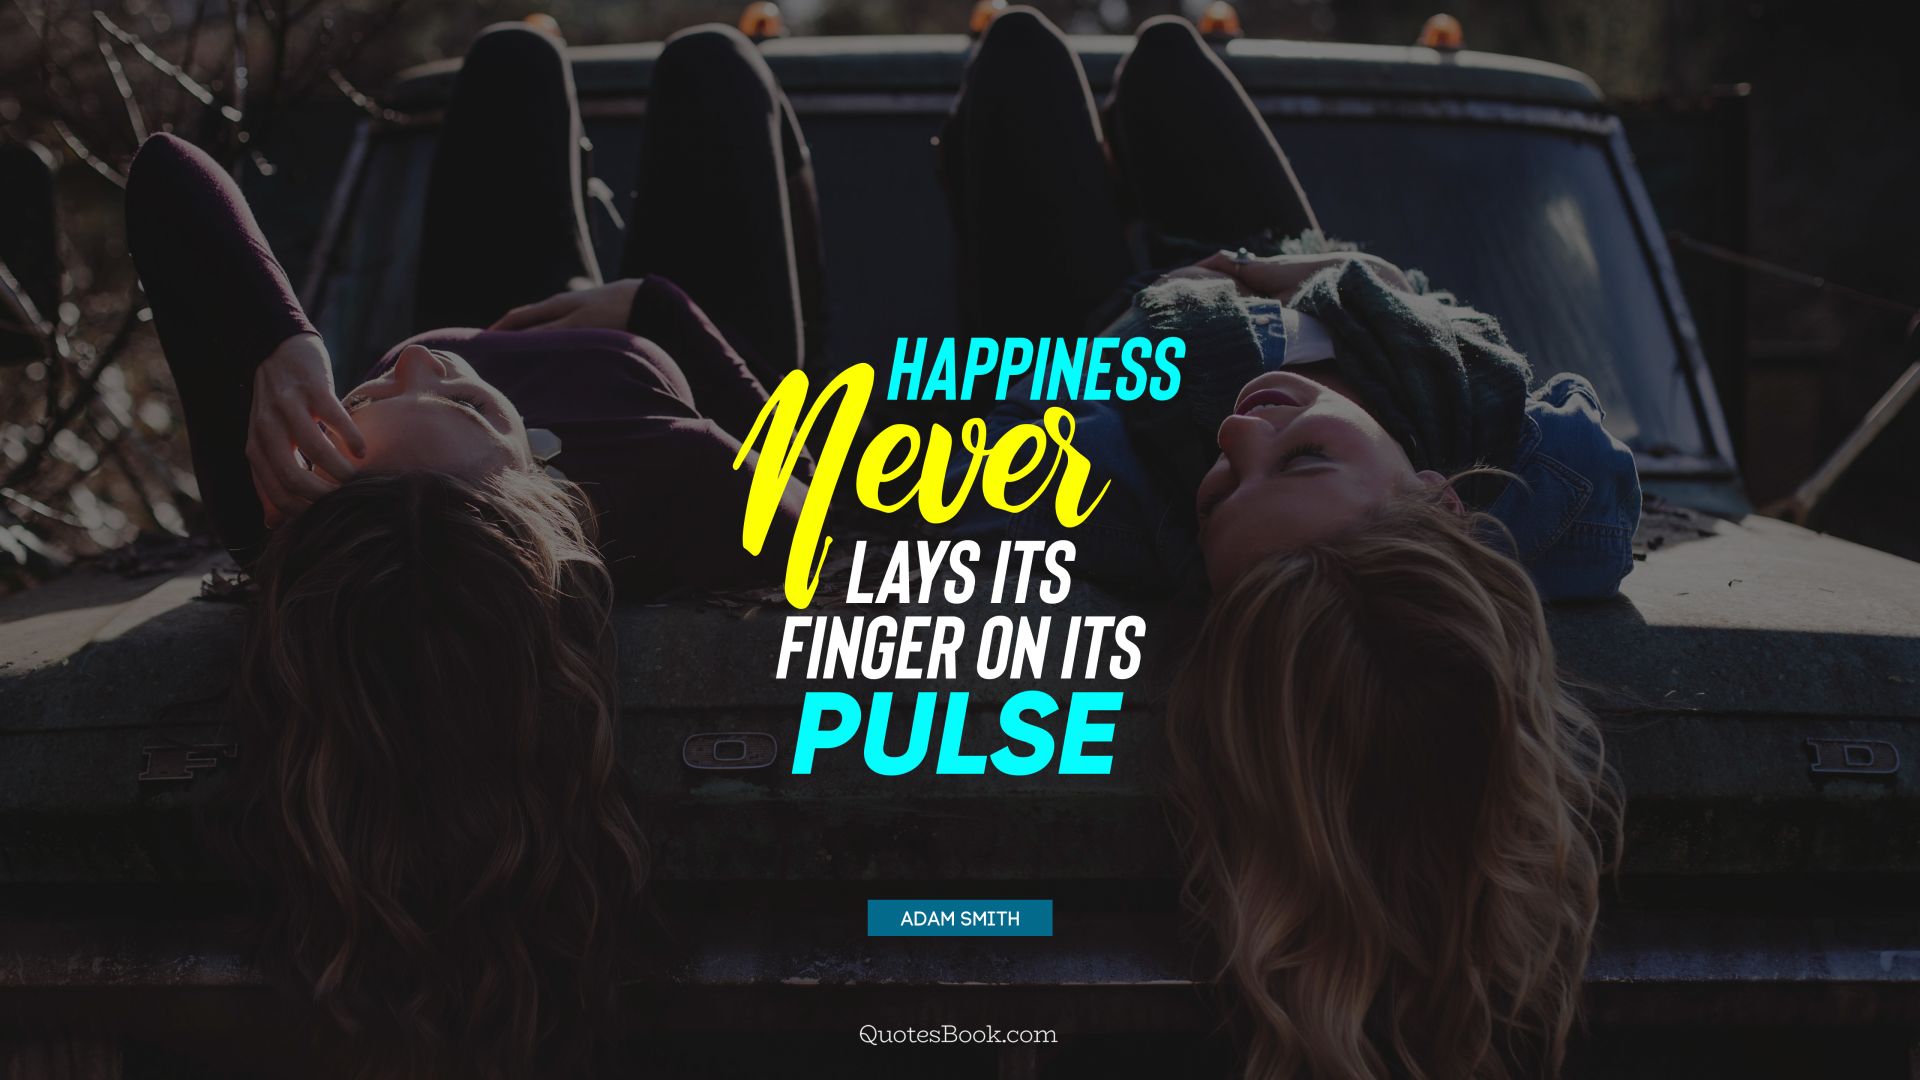 Happiness never lays its finger on its pulse. - Quote by Adam Smith